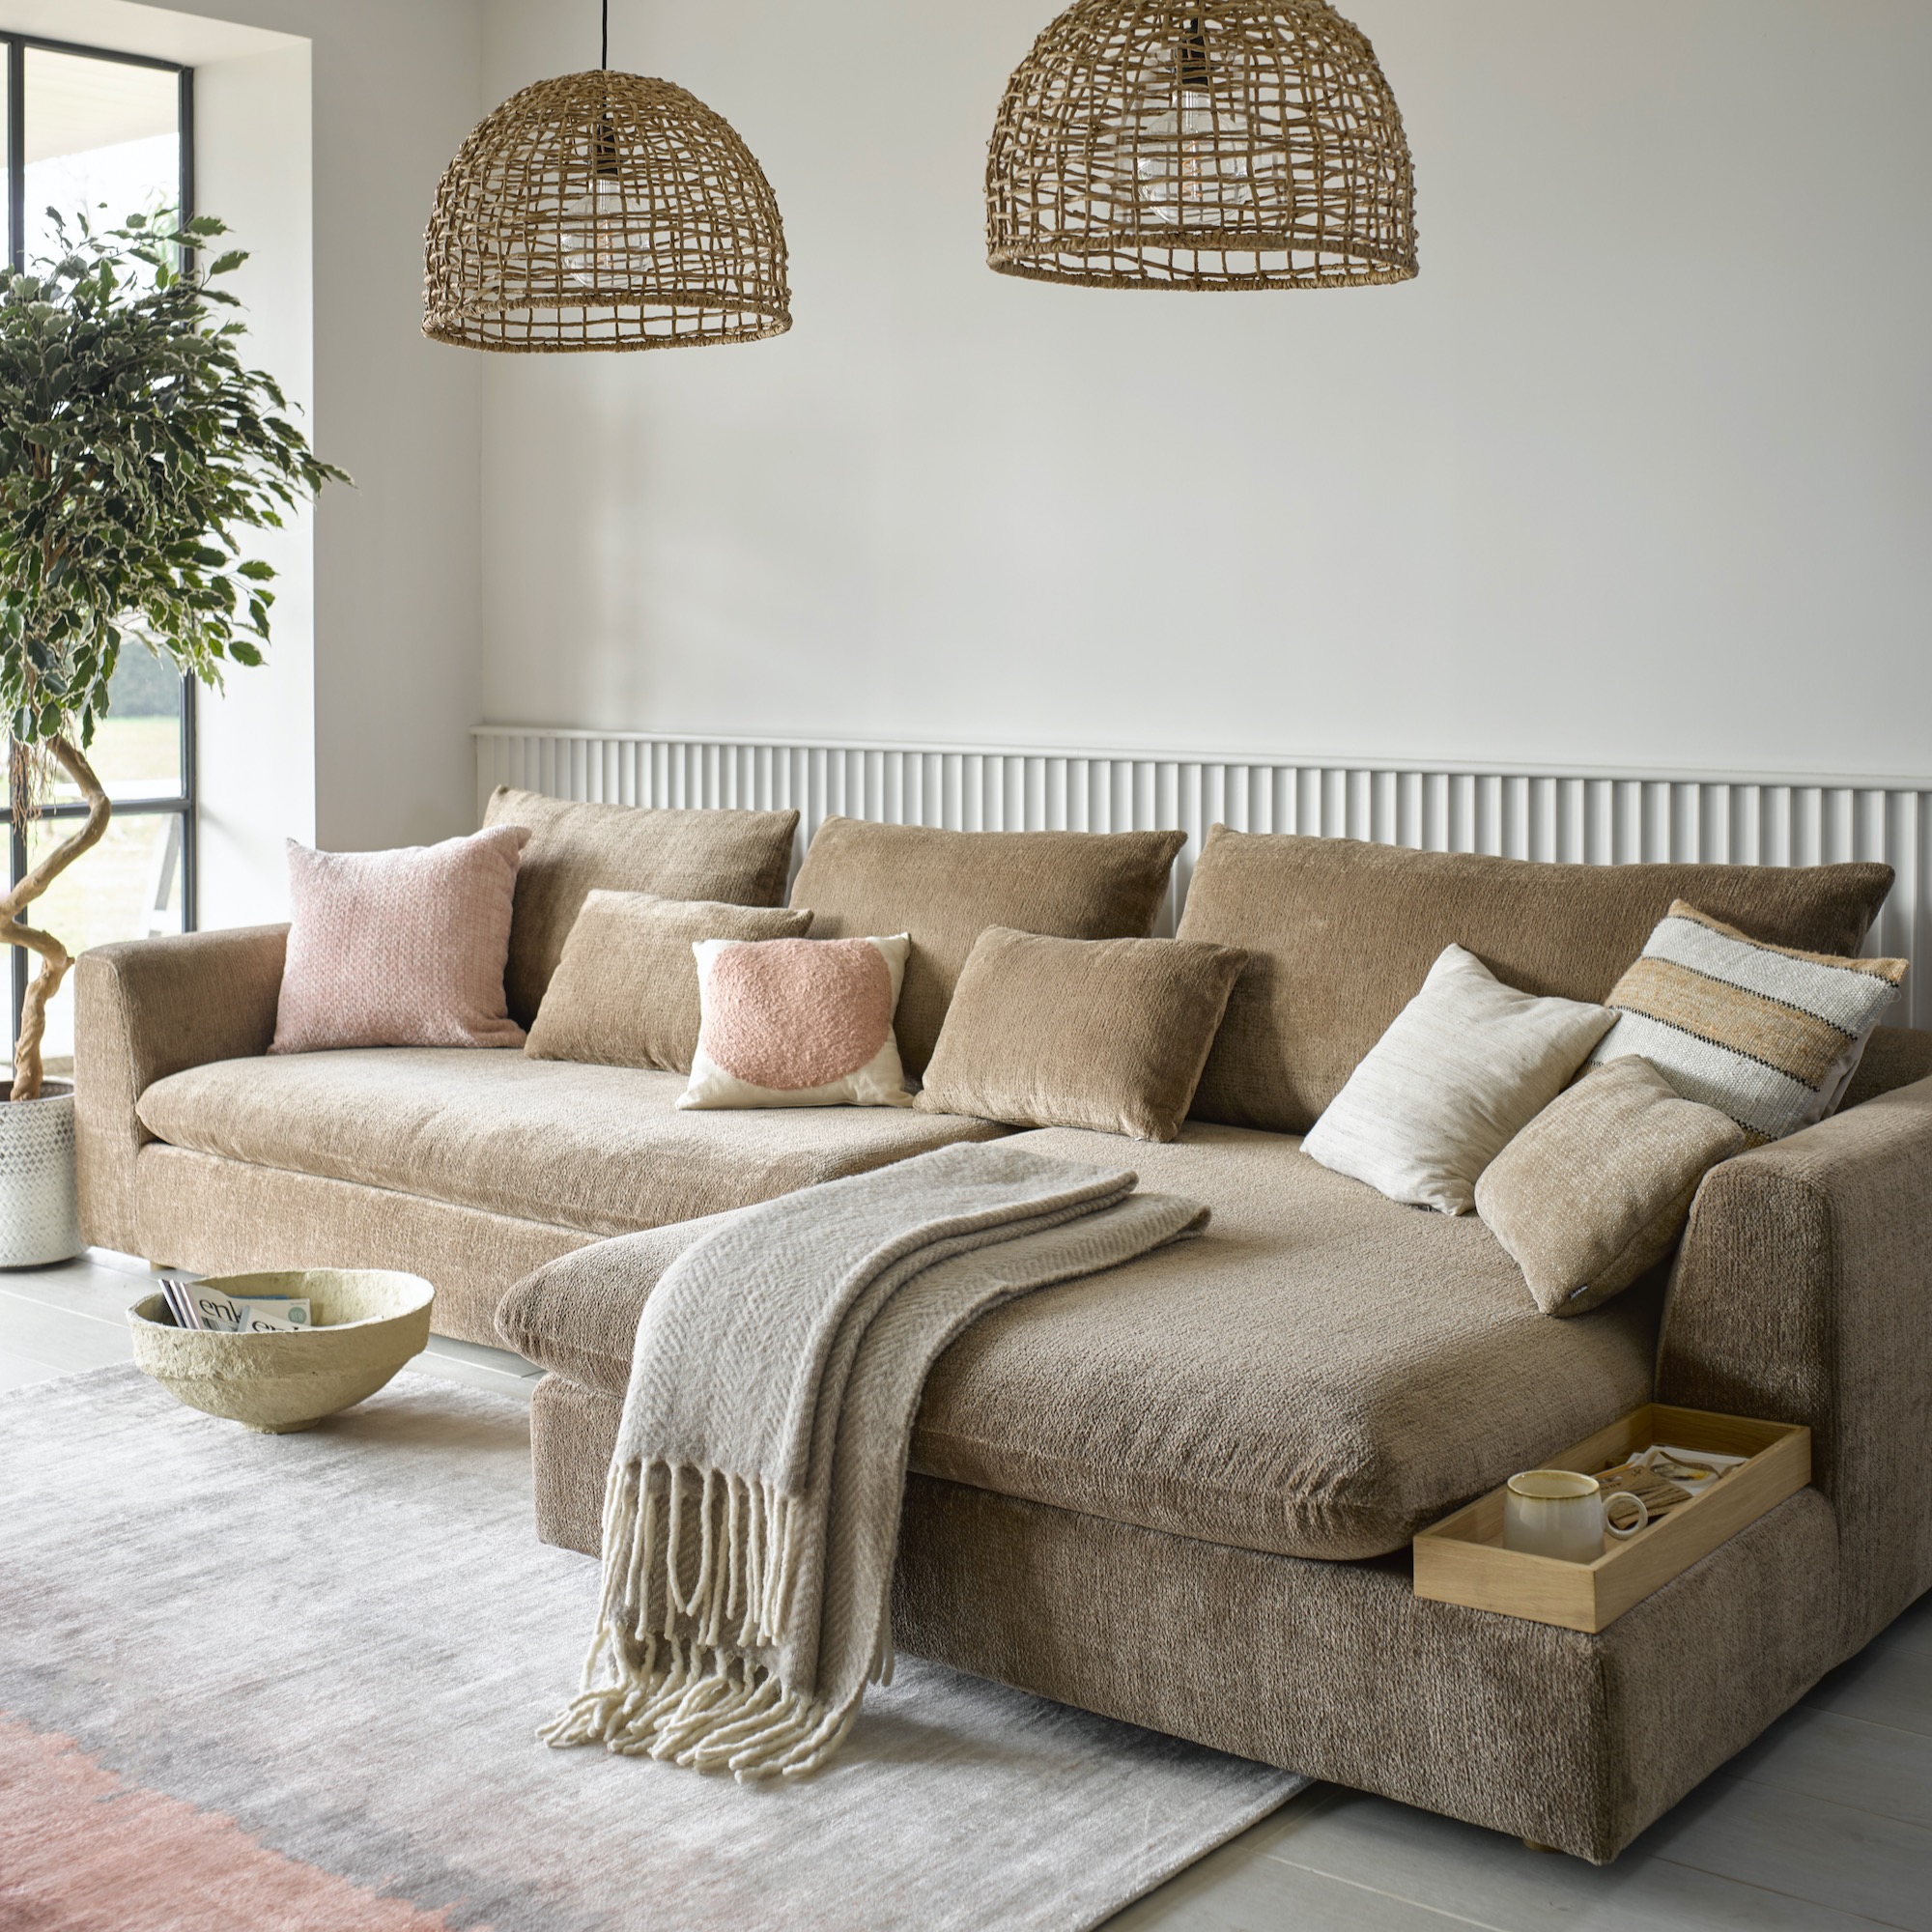 Pale living room with gold beige corner sofa